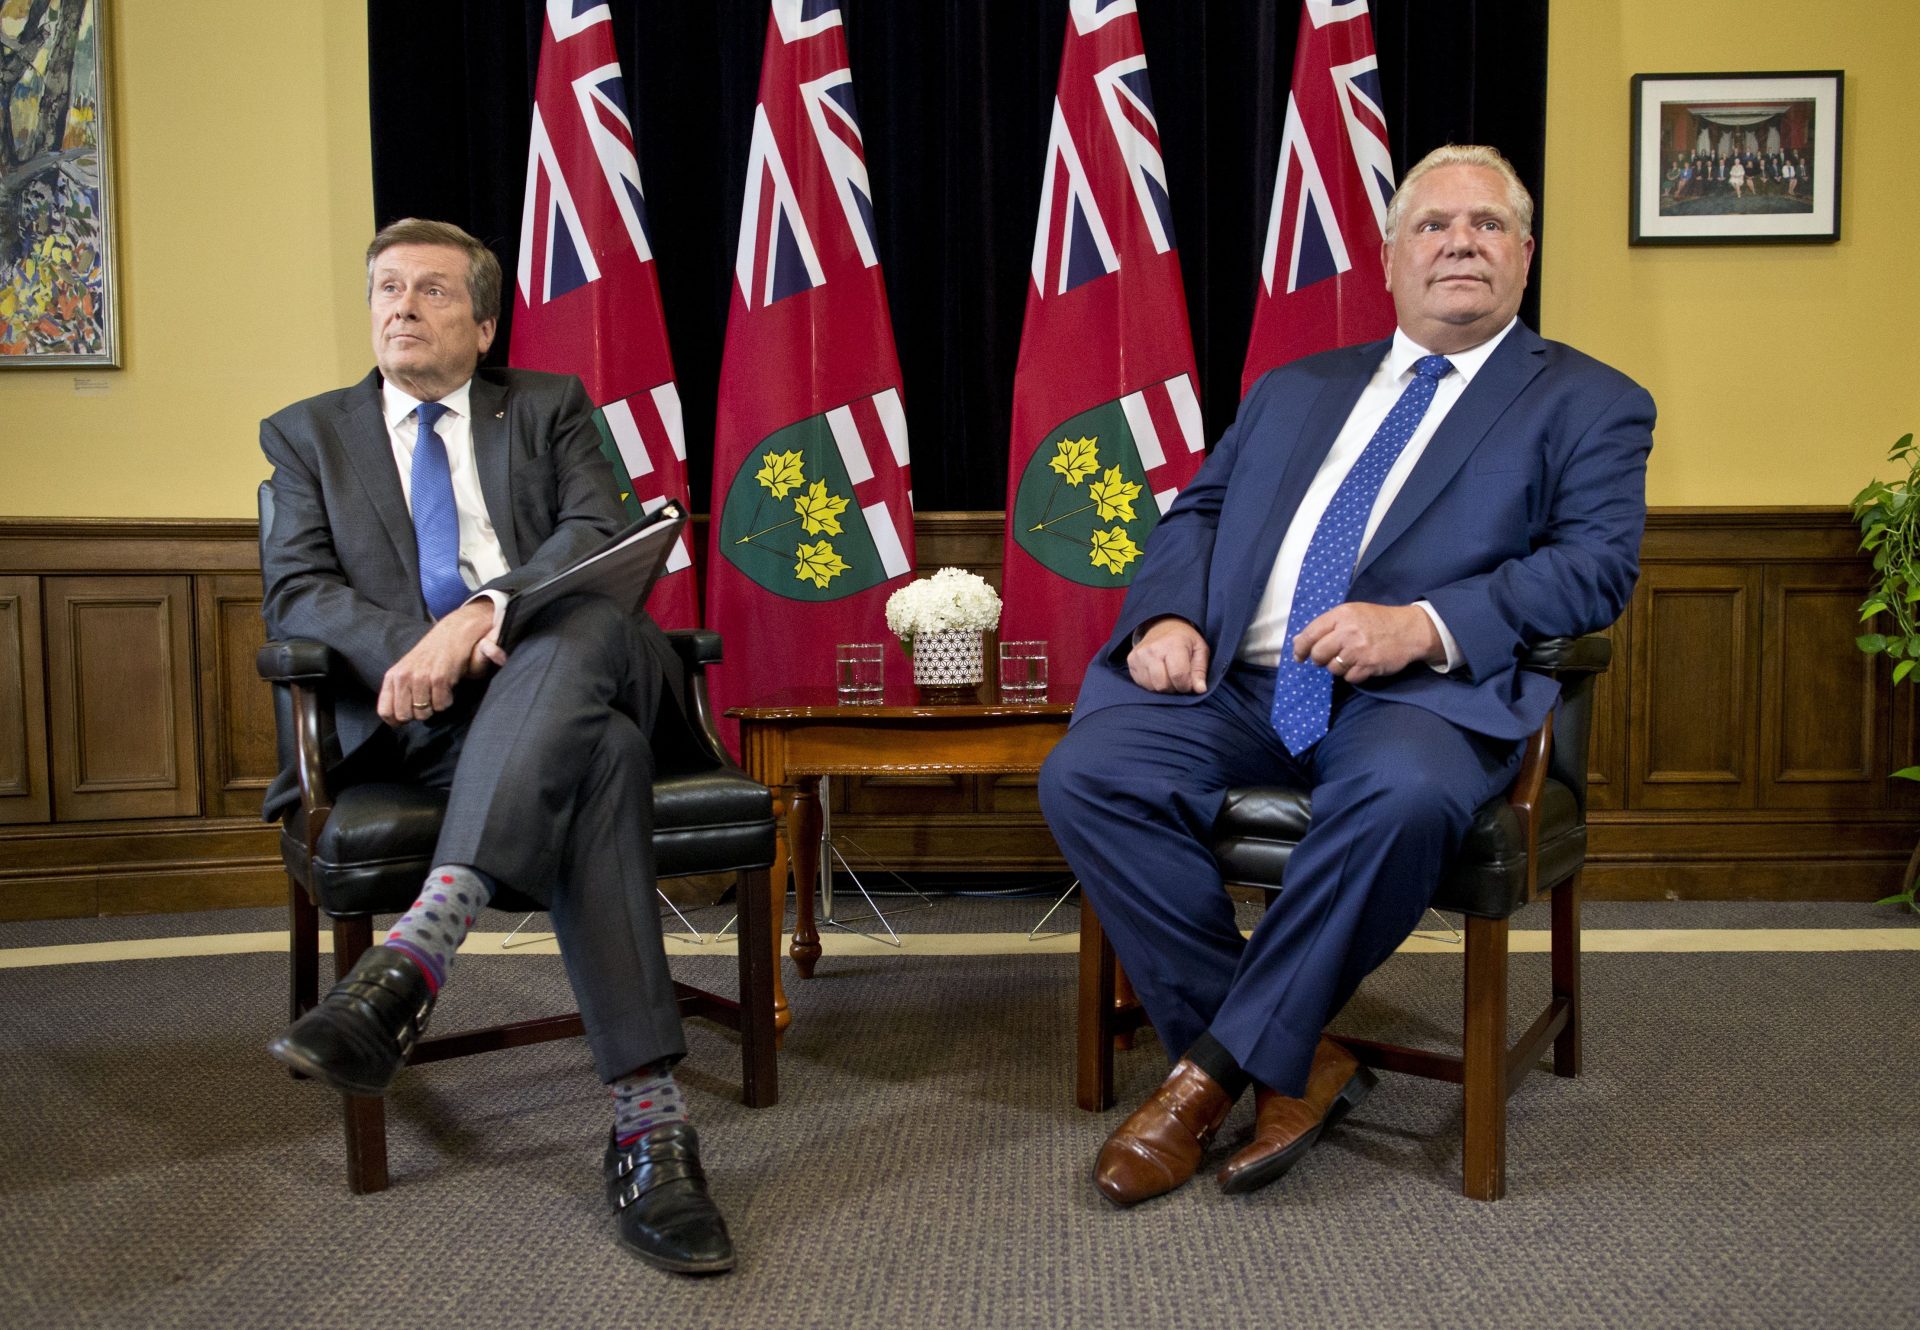 Ontario public health units join Toronto in condemning Ford government cuts